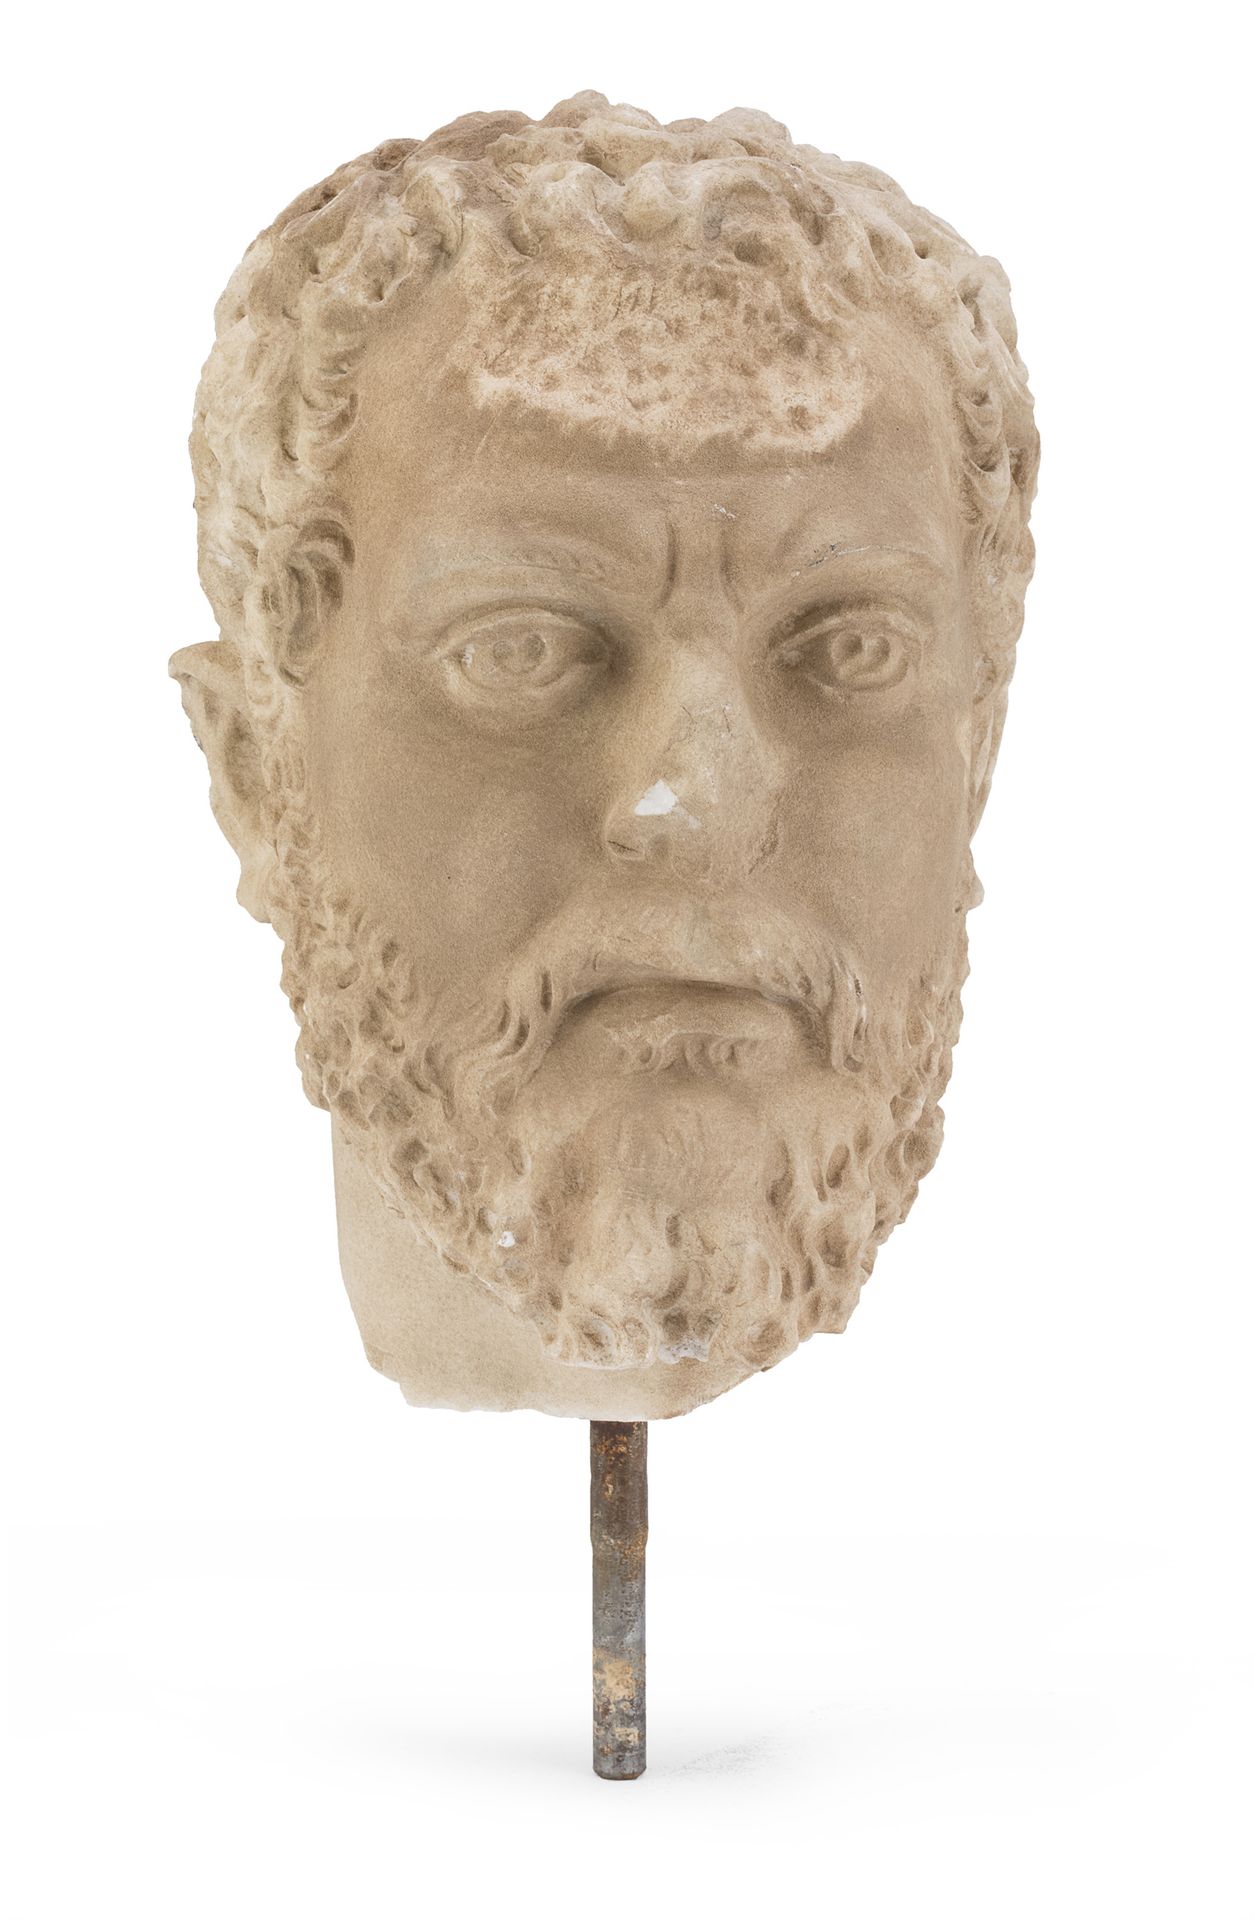 Null HEAD IN WHITE MARBLE, 20th CENTURY